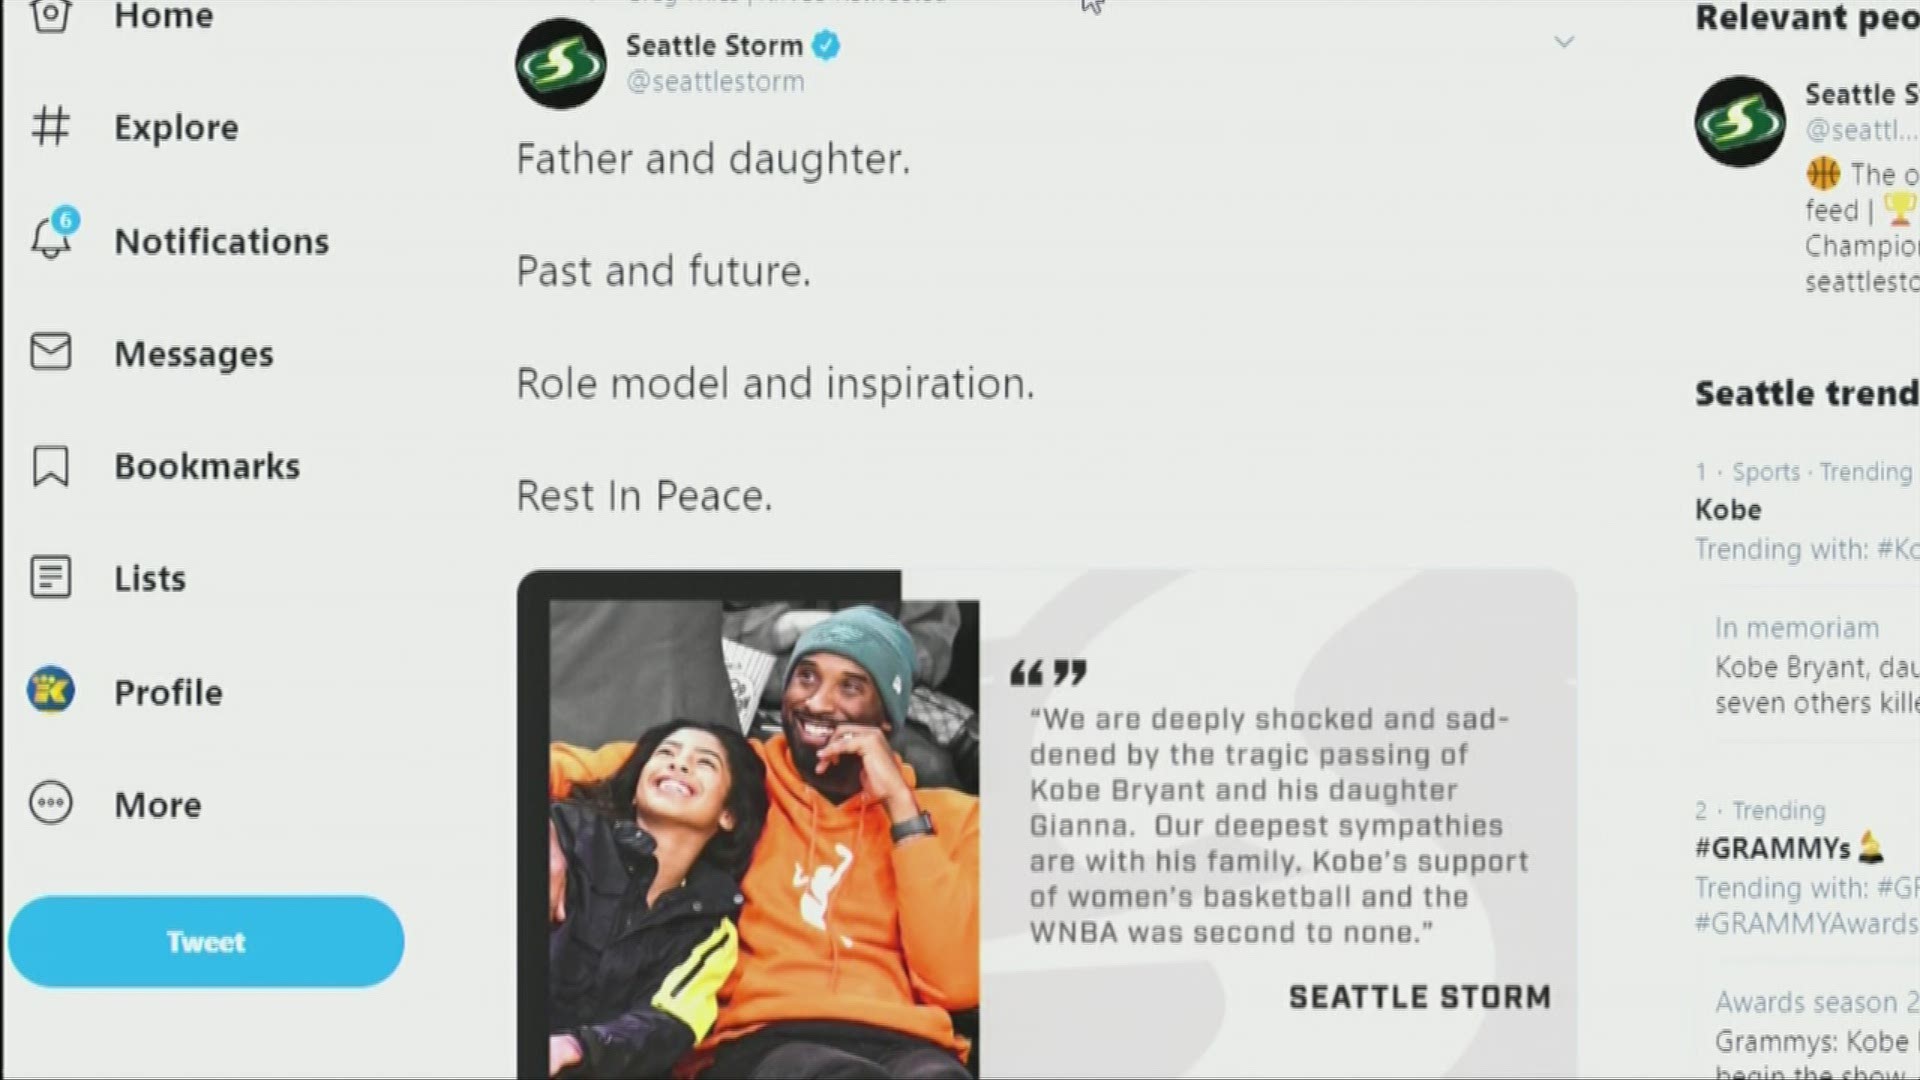 Support from Seattle athletes pours in on Twitter in response to Kobe Bryant's death.